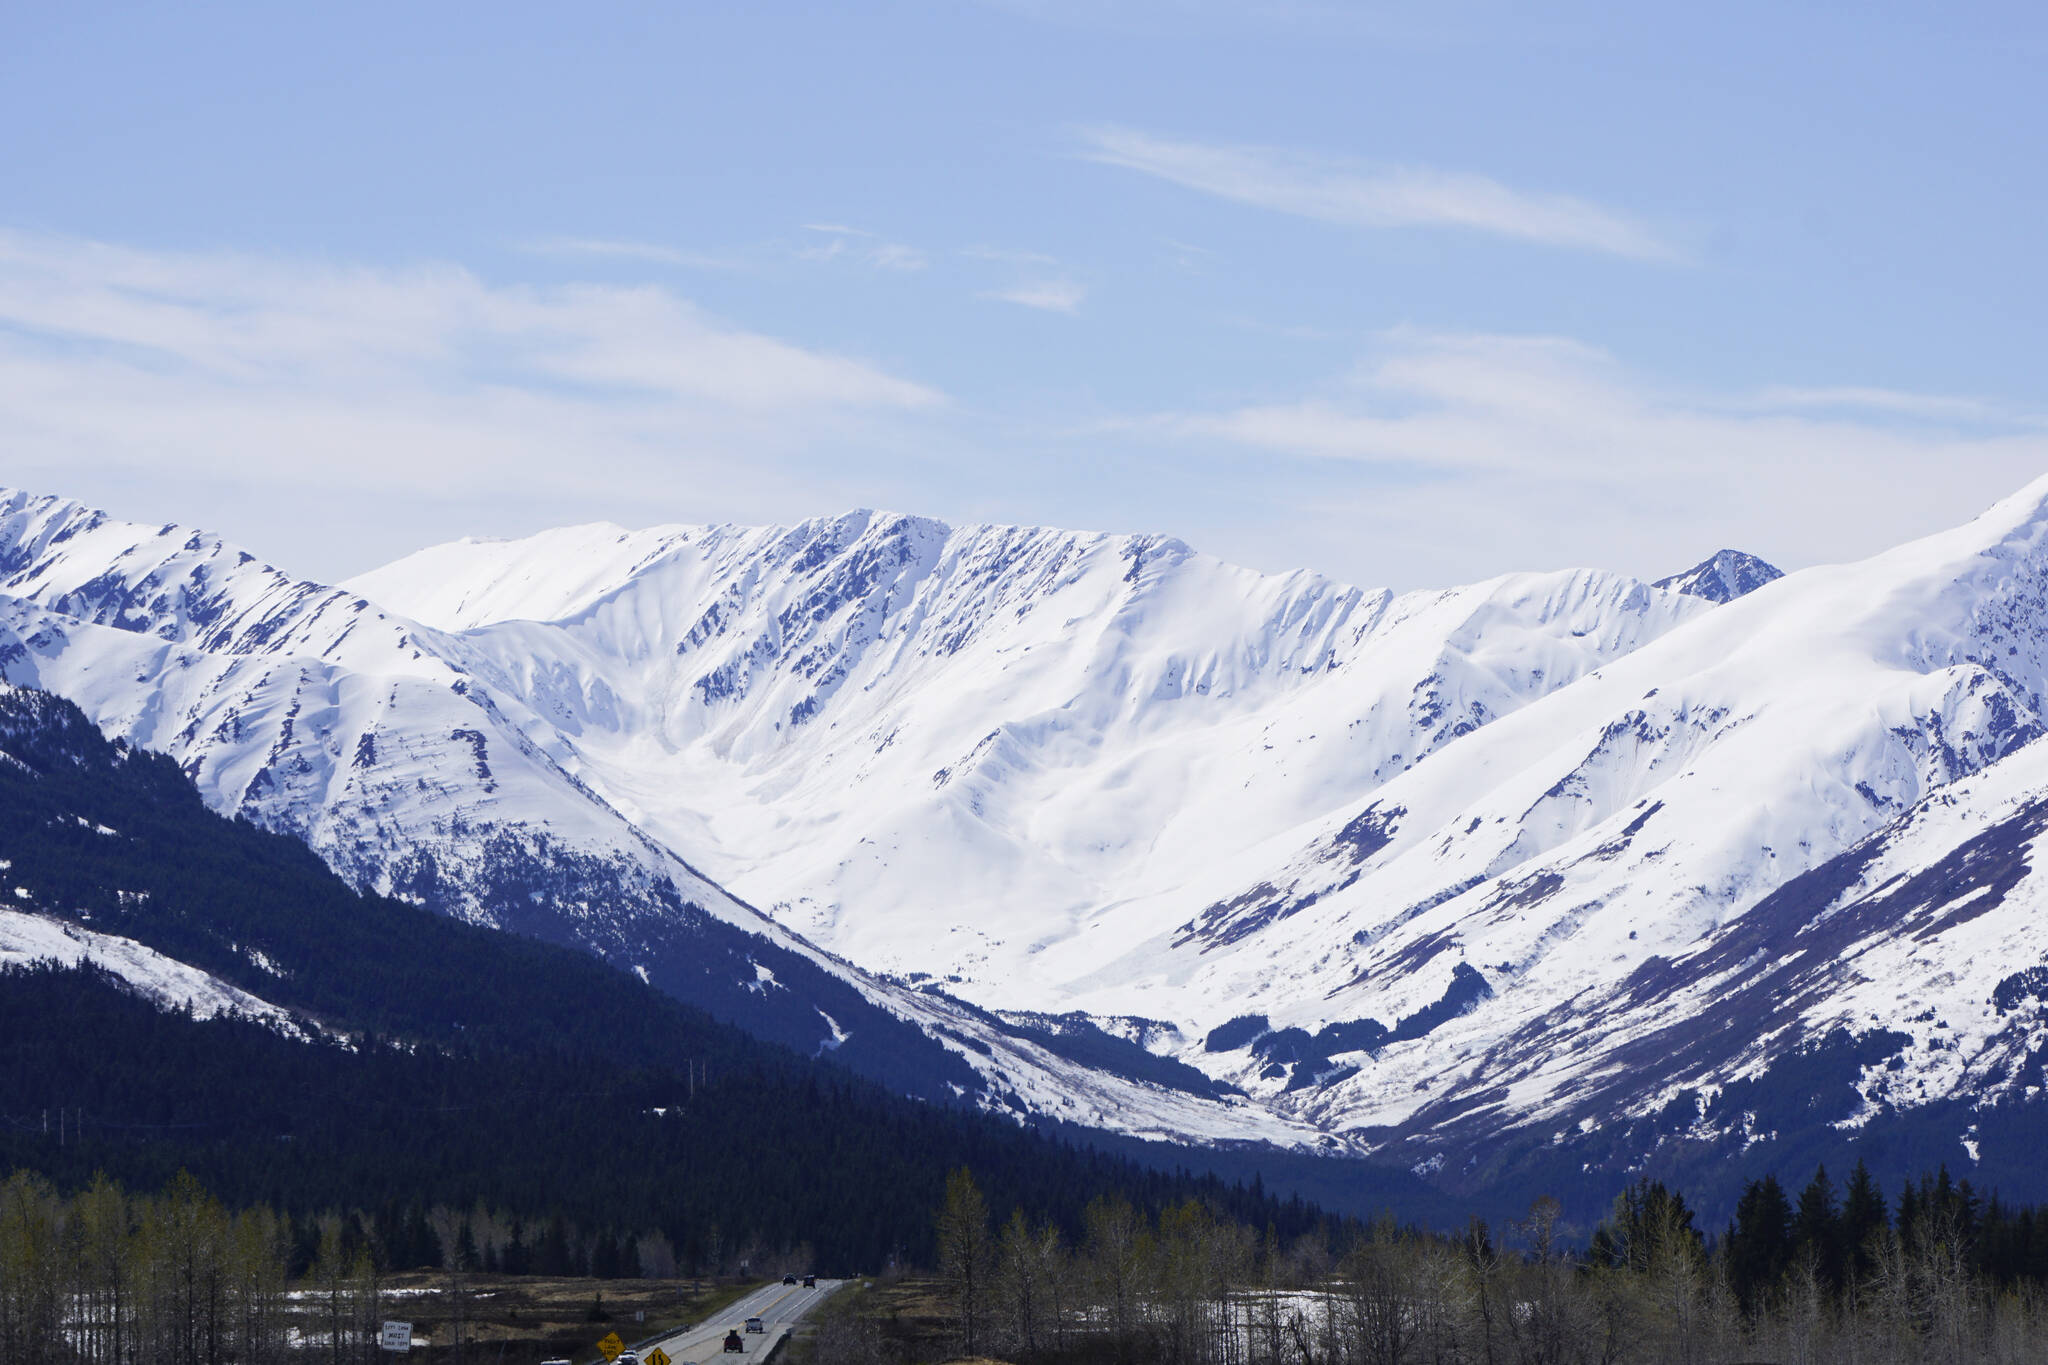 The scenery on the drive from Homer to Anchorage ranges from beautiful to awe inspiring, like Turnagain Pass on the Kenai Peninsula, as seen here on Sunday, May 22, 2022. (Photo by Michael Armstrong/Homer News)